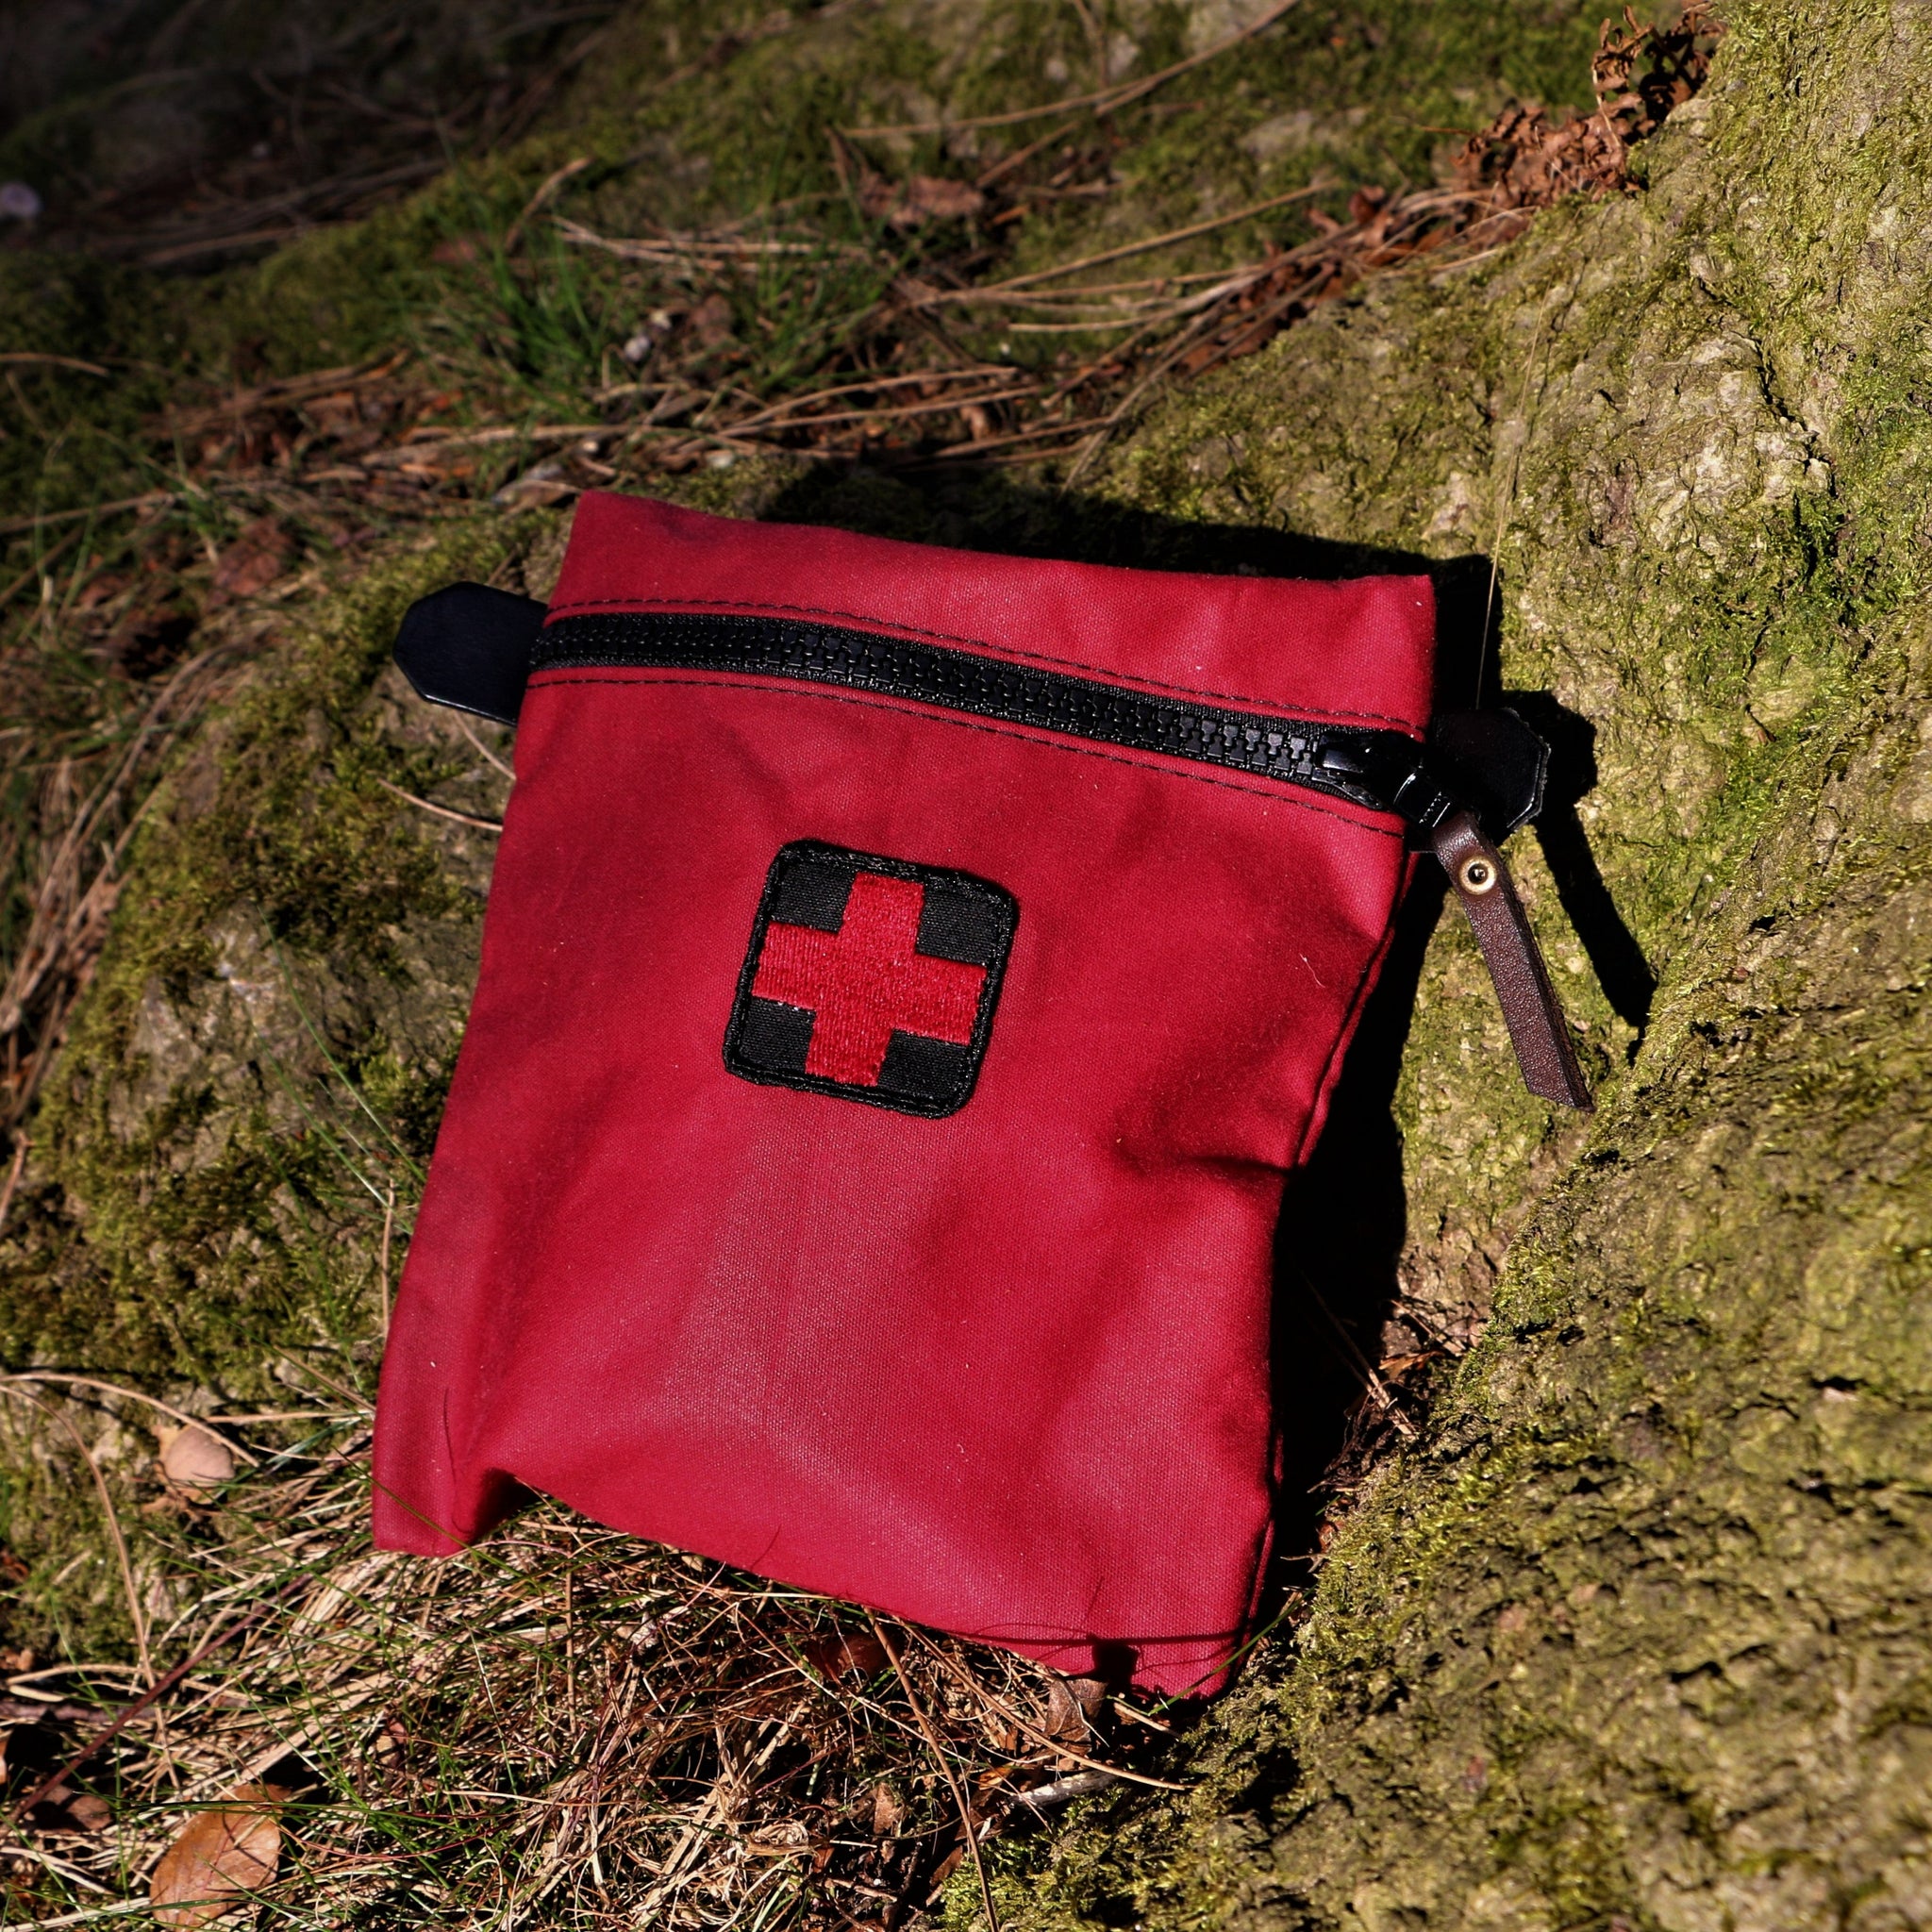 A red wax canvas first aid kit for bushcraft